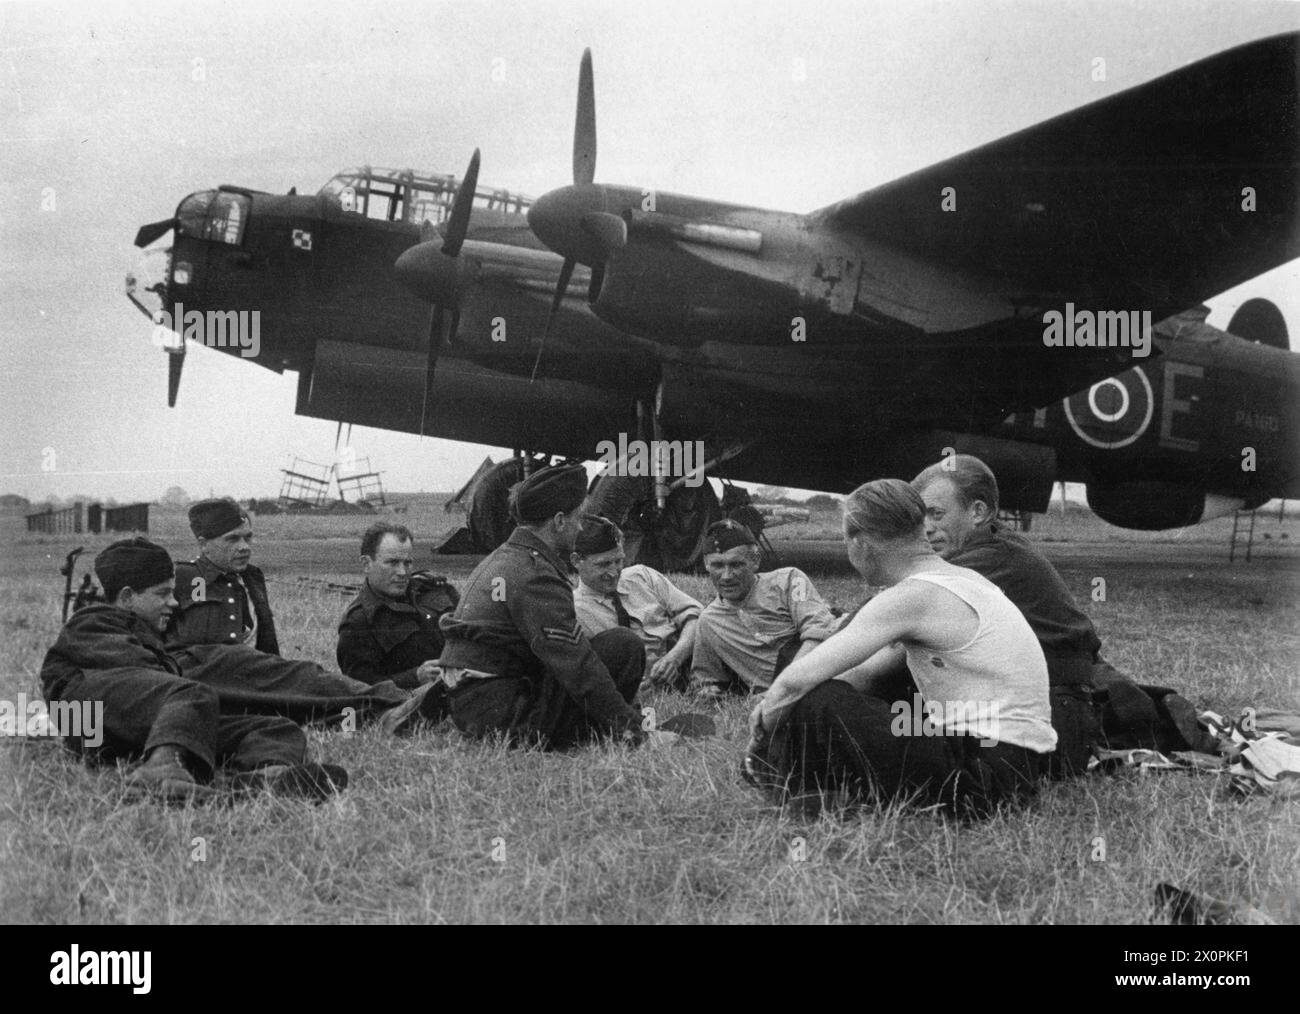 THE POLISH AIR FORCE IN BRITAIN, 1940-1947 - Ground mechanics of No. 300 Polish Bomber Squadron enjoying a short break in the open air after making their Avro Lancaster bombers ready for a next sortie. Note the Lancaster BH-E, PA160 in the background.Photograph very likely taken at RAF Faldingworth, summer 1944 Polish Air Force, Polish Air Force, 300 'Land of Masovia' Bomber Squadron Stock Photo